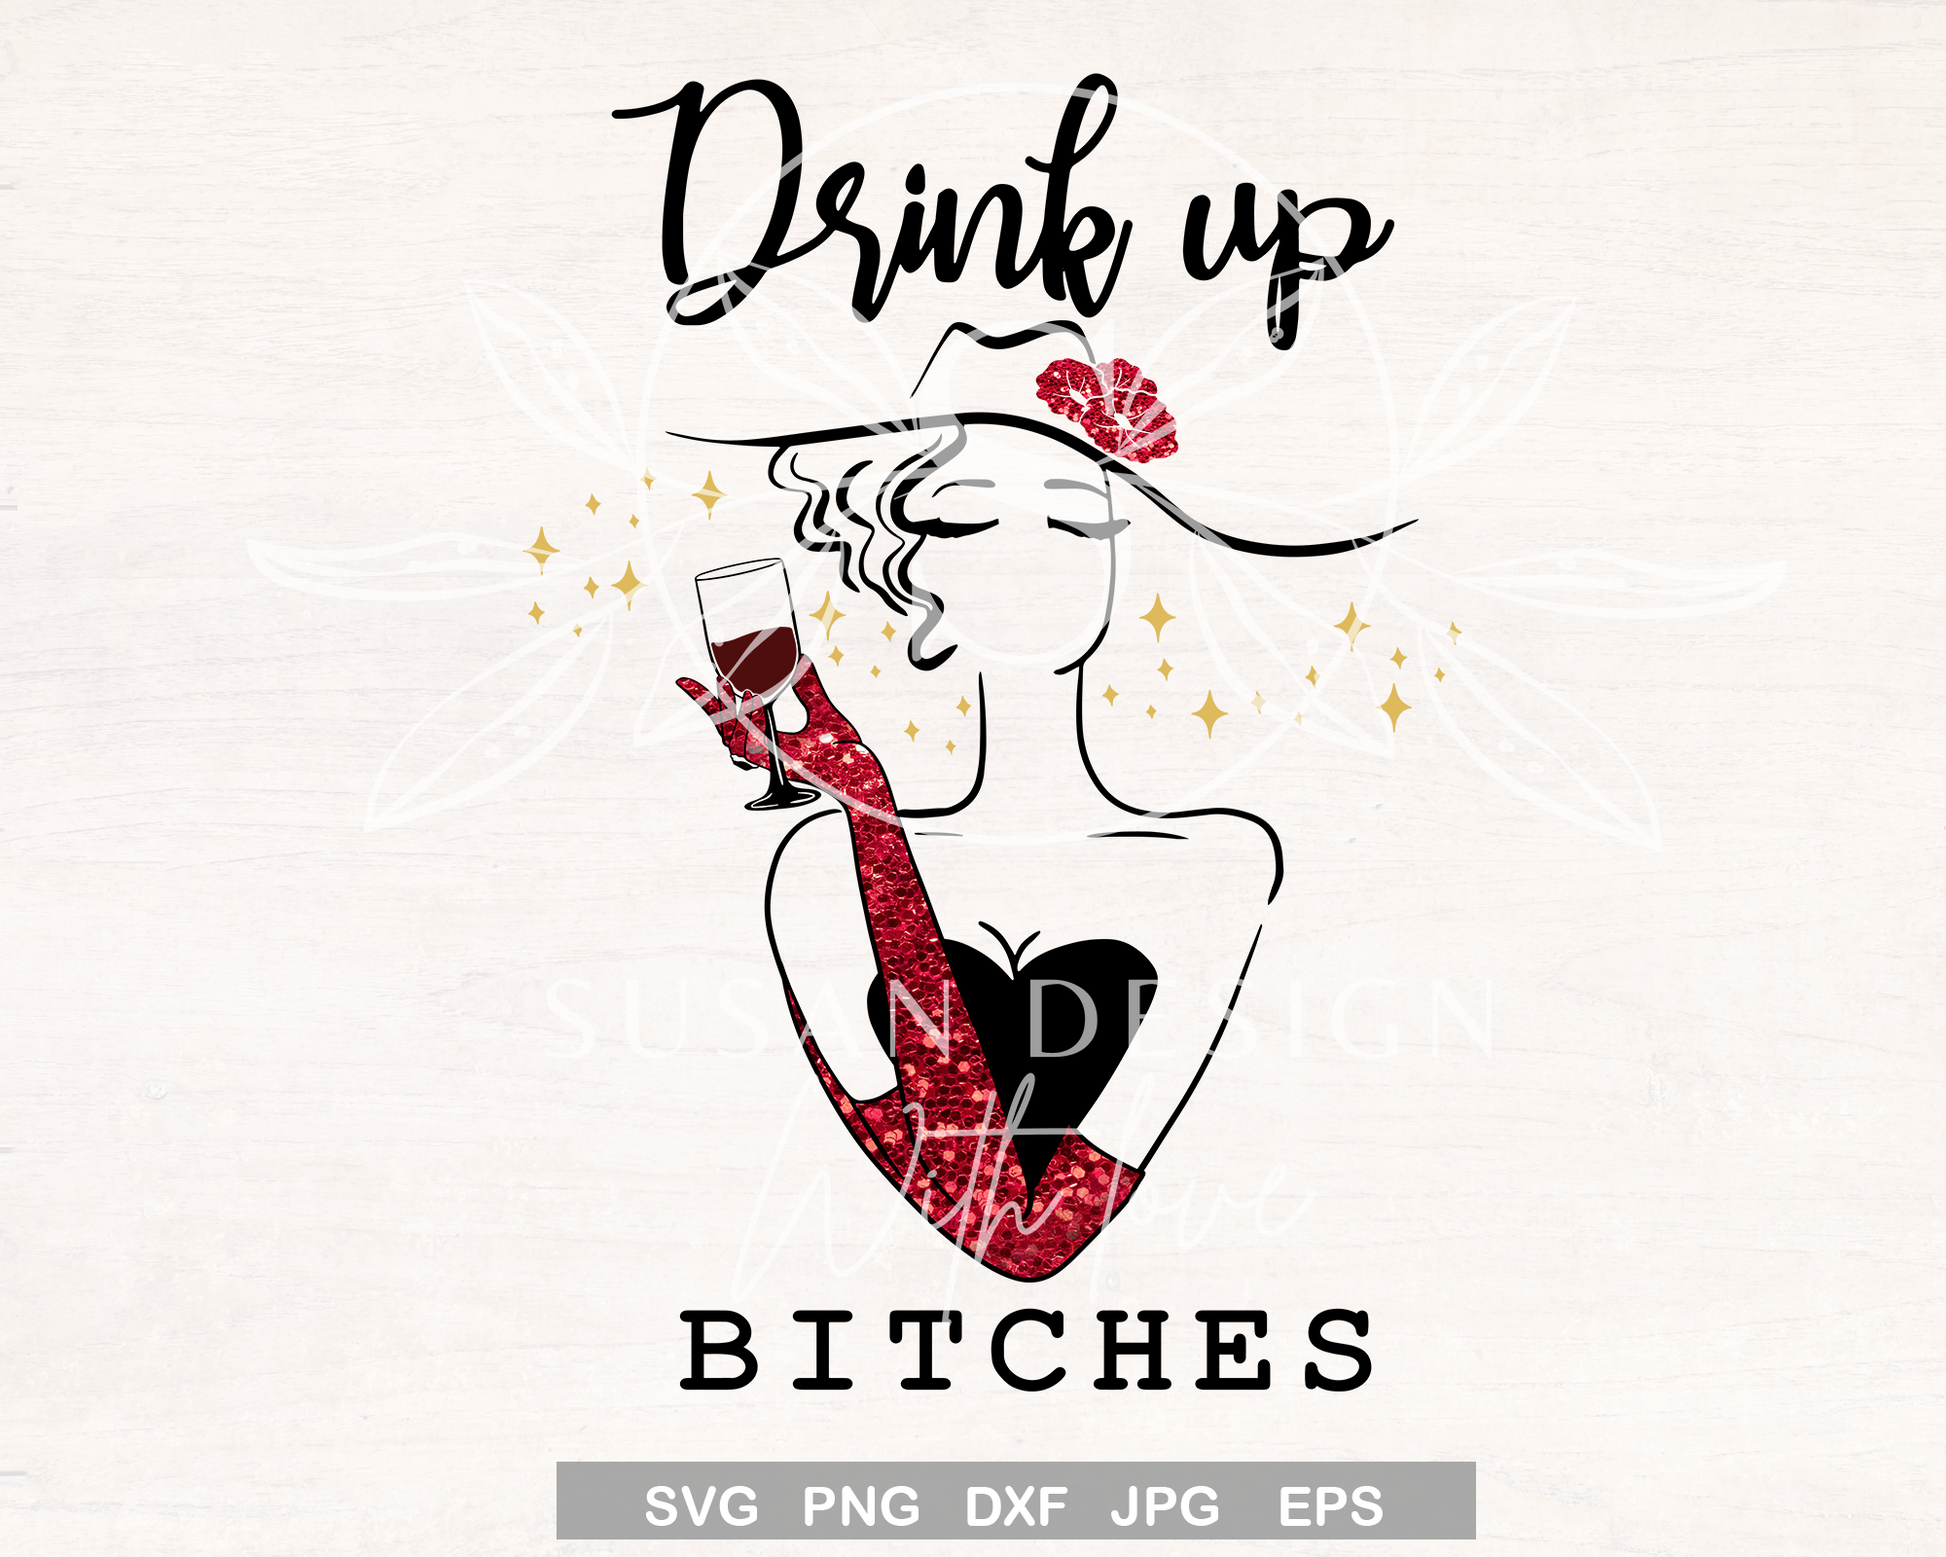 Bra off Hair up Wine Poured Cute Funny Quotes Positive Motivational Savage  Phrase Saying Alcohol Drink SVG PNG JPG Vector Design Cut Files -   Canada